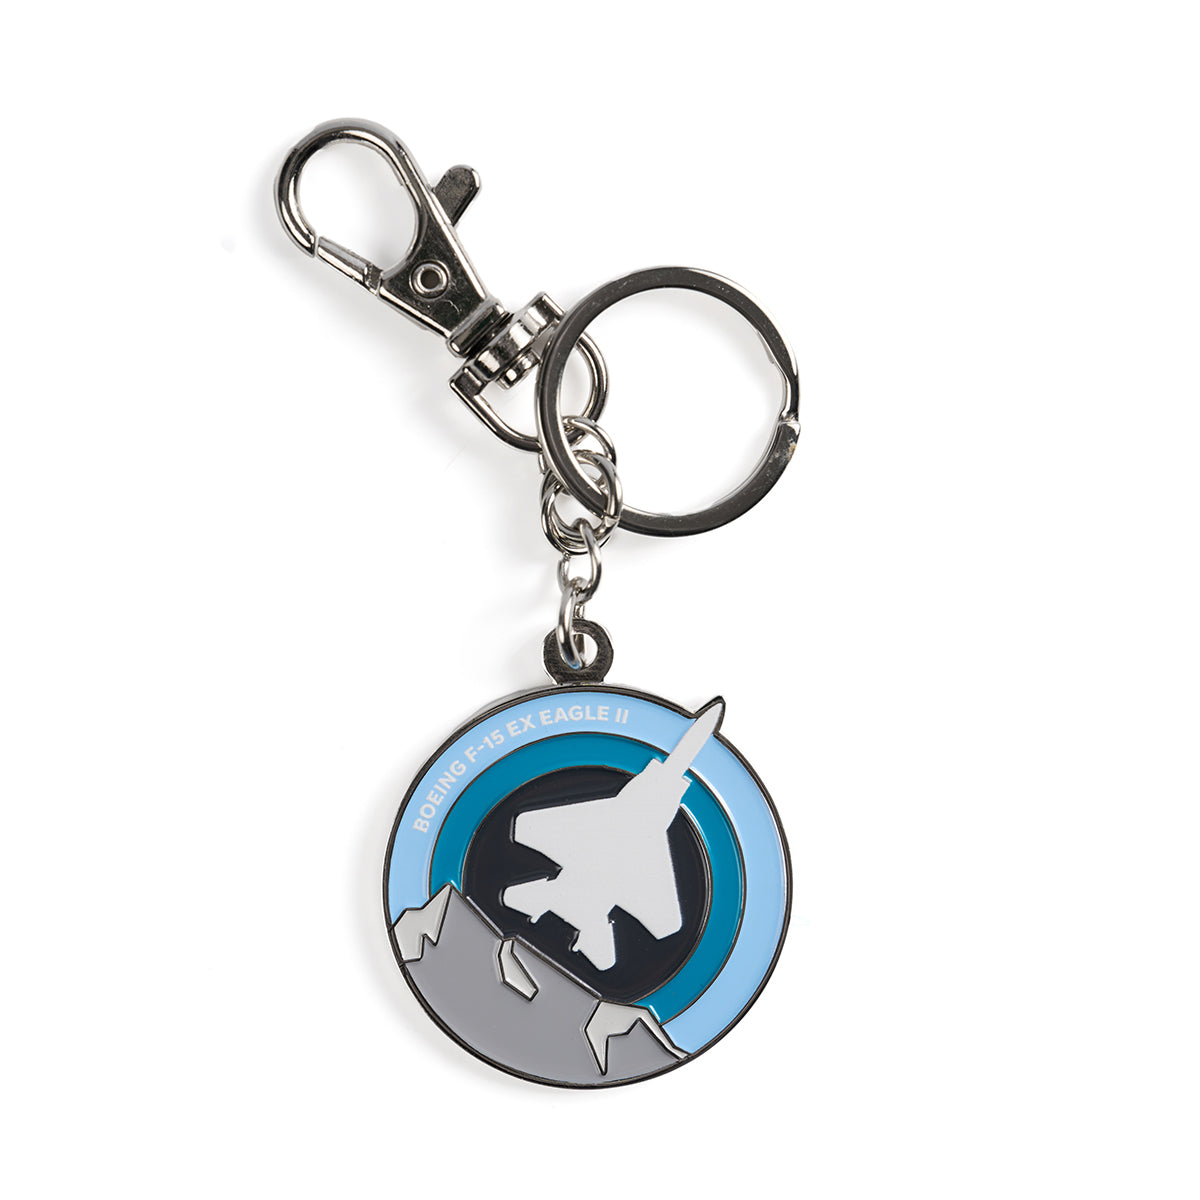 Skyward keychain, featuring the iconic Boeing F-15EX Eagle in a roundel design.